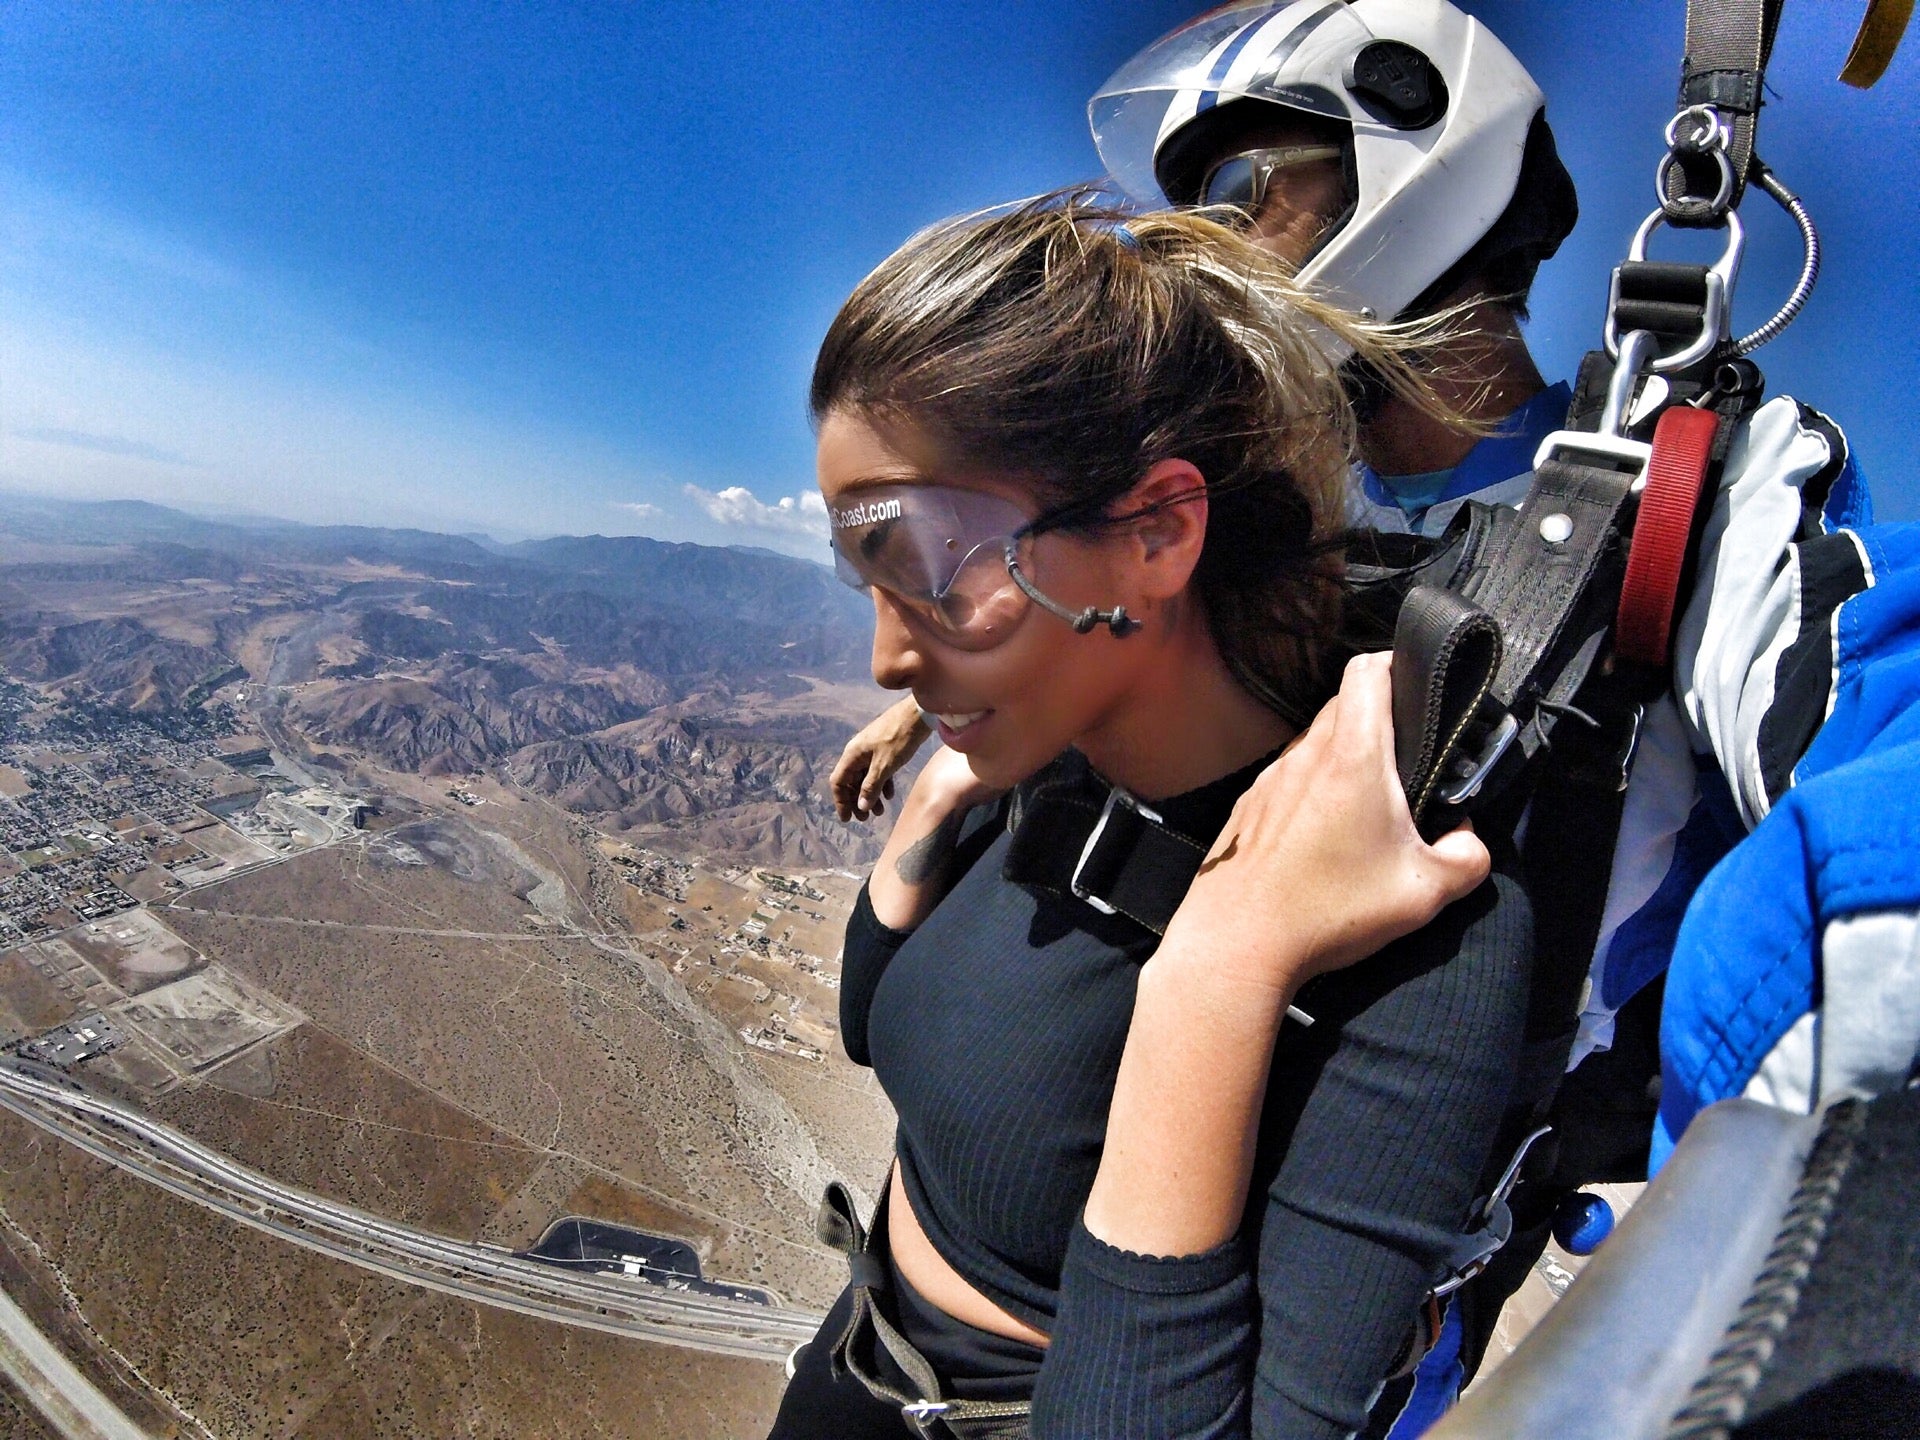 Skydive Coast, 200 St, Banning, CA, Sports - MapQuest